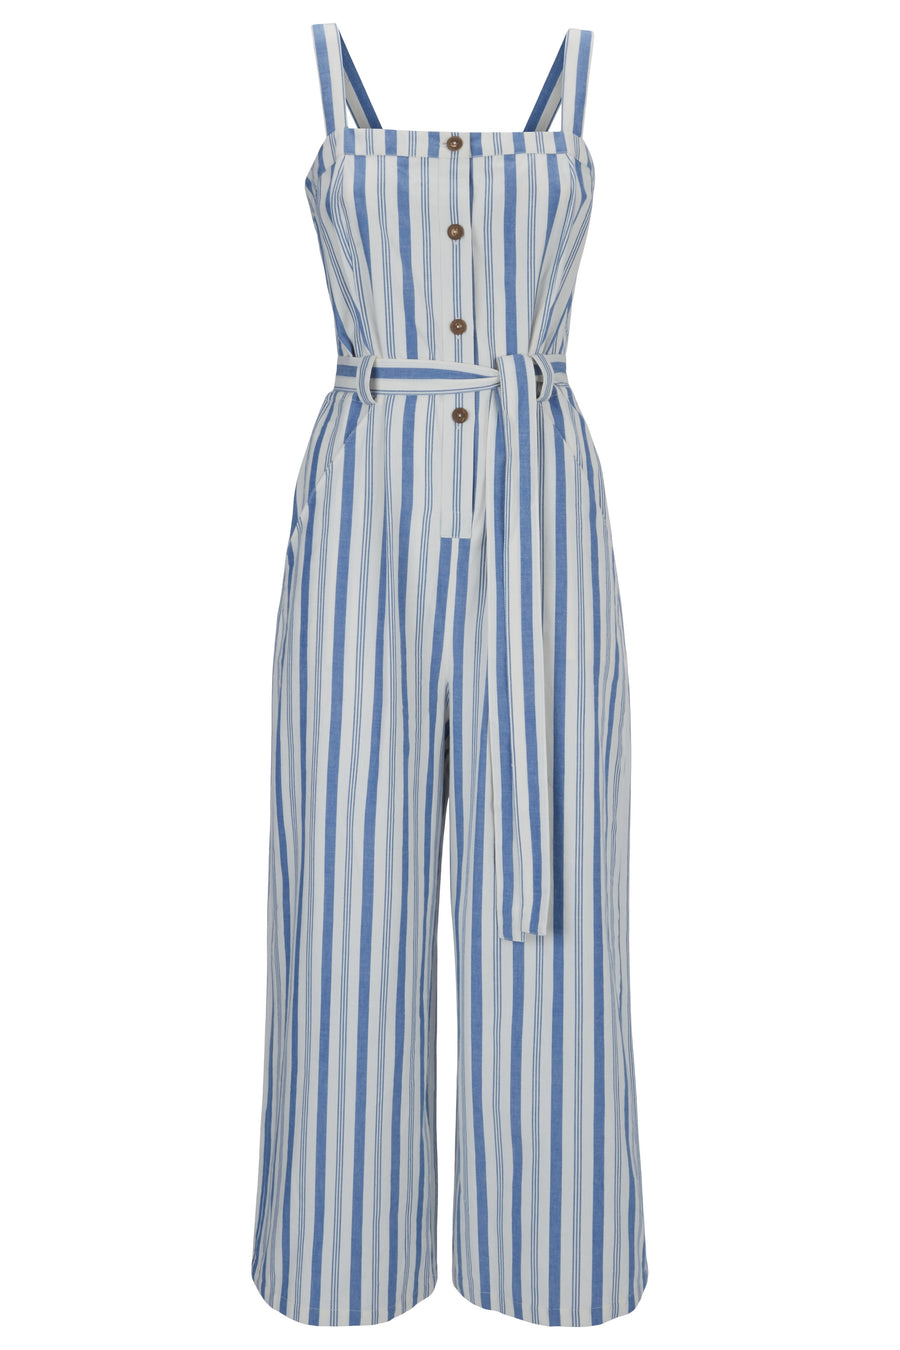 People Tree Fair Trade, Ethical & Sustainable Rena Striped Jumpsuit in Blue stripe 100% Organic Cotton